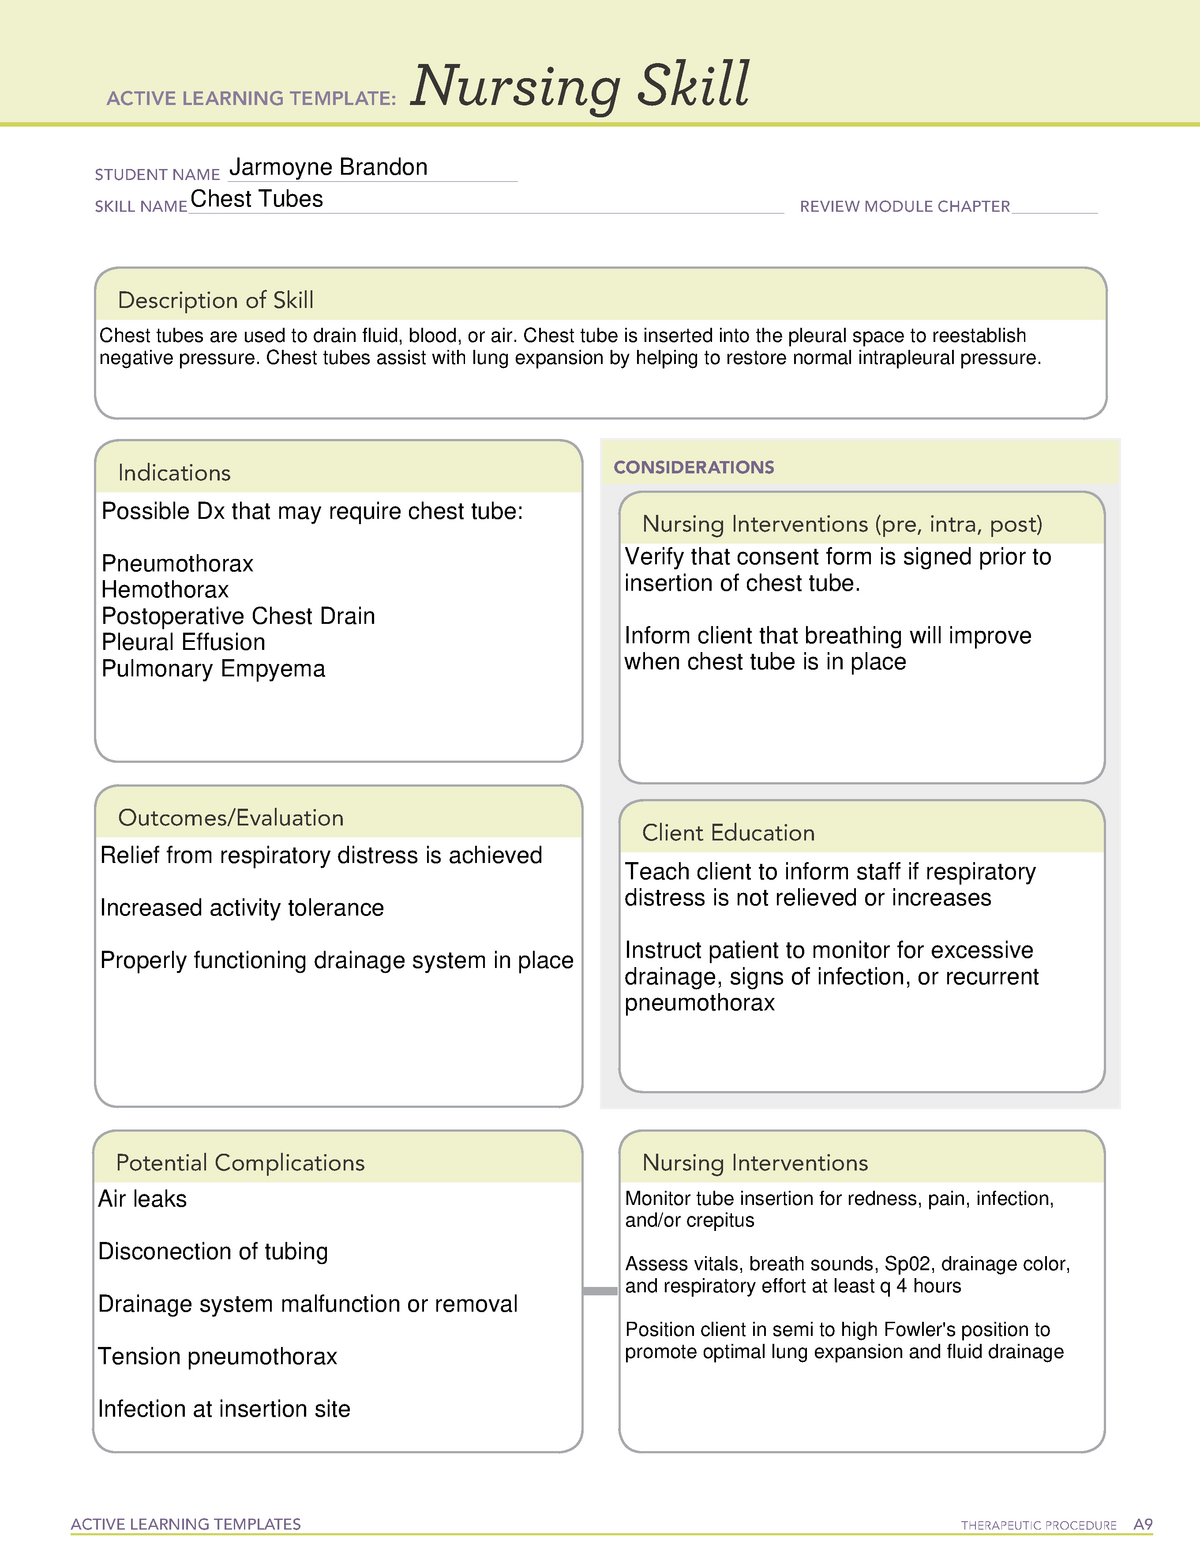 PN II Clinical Nursing Skill IV Chest Tube ACTIVE LEARNING TEMPLATES